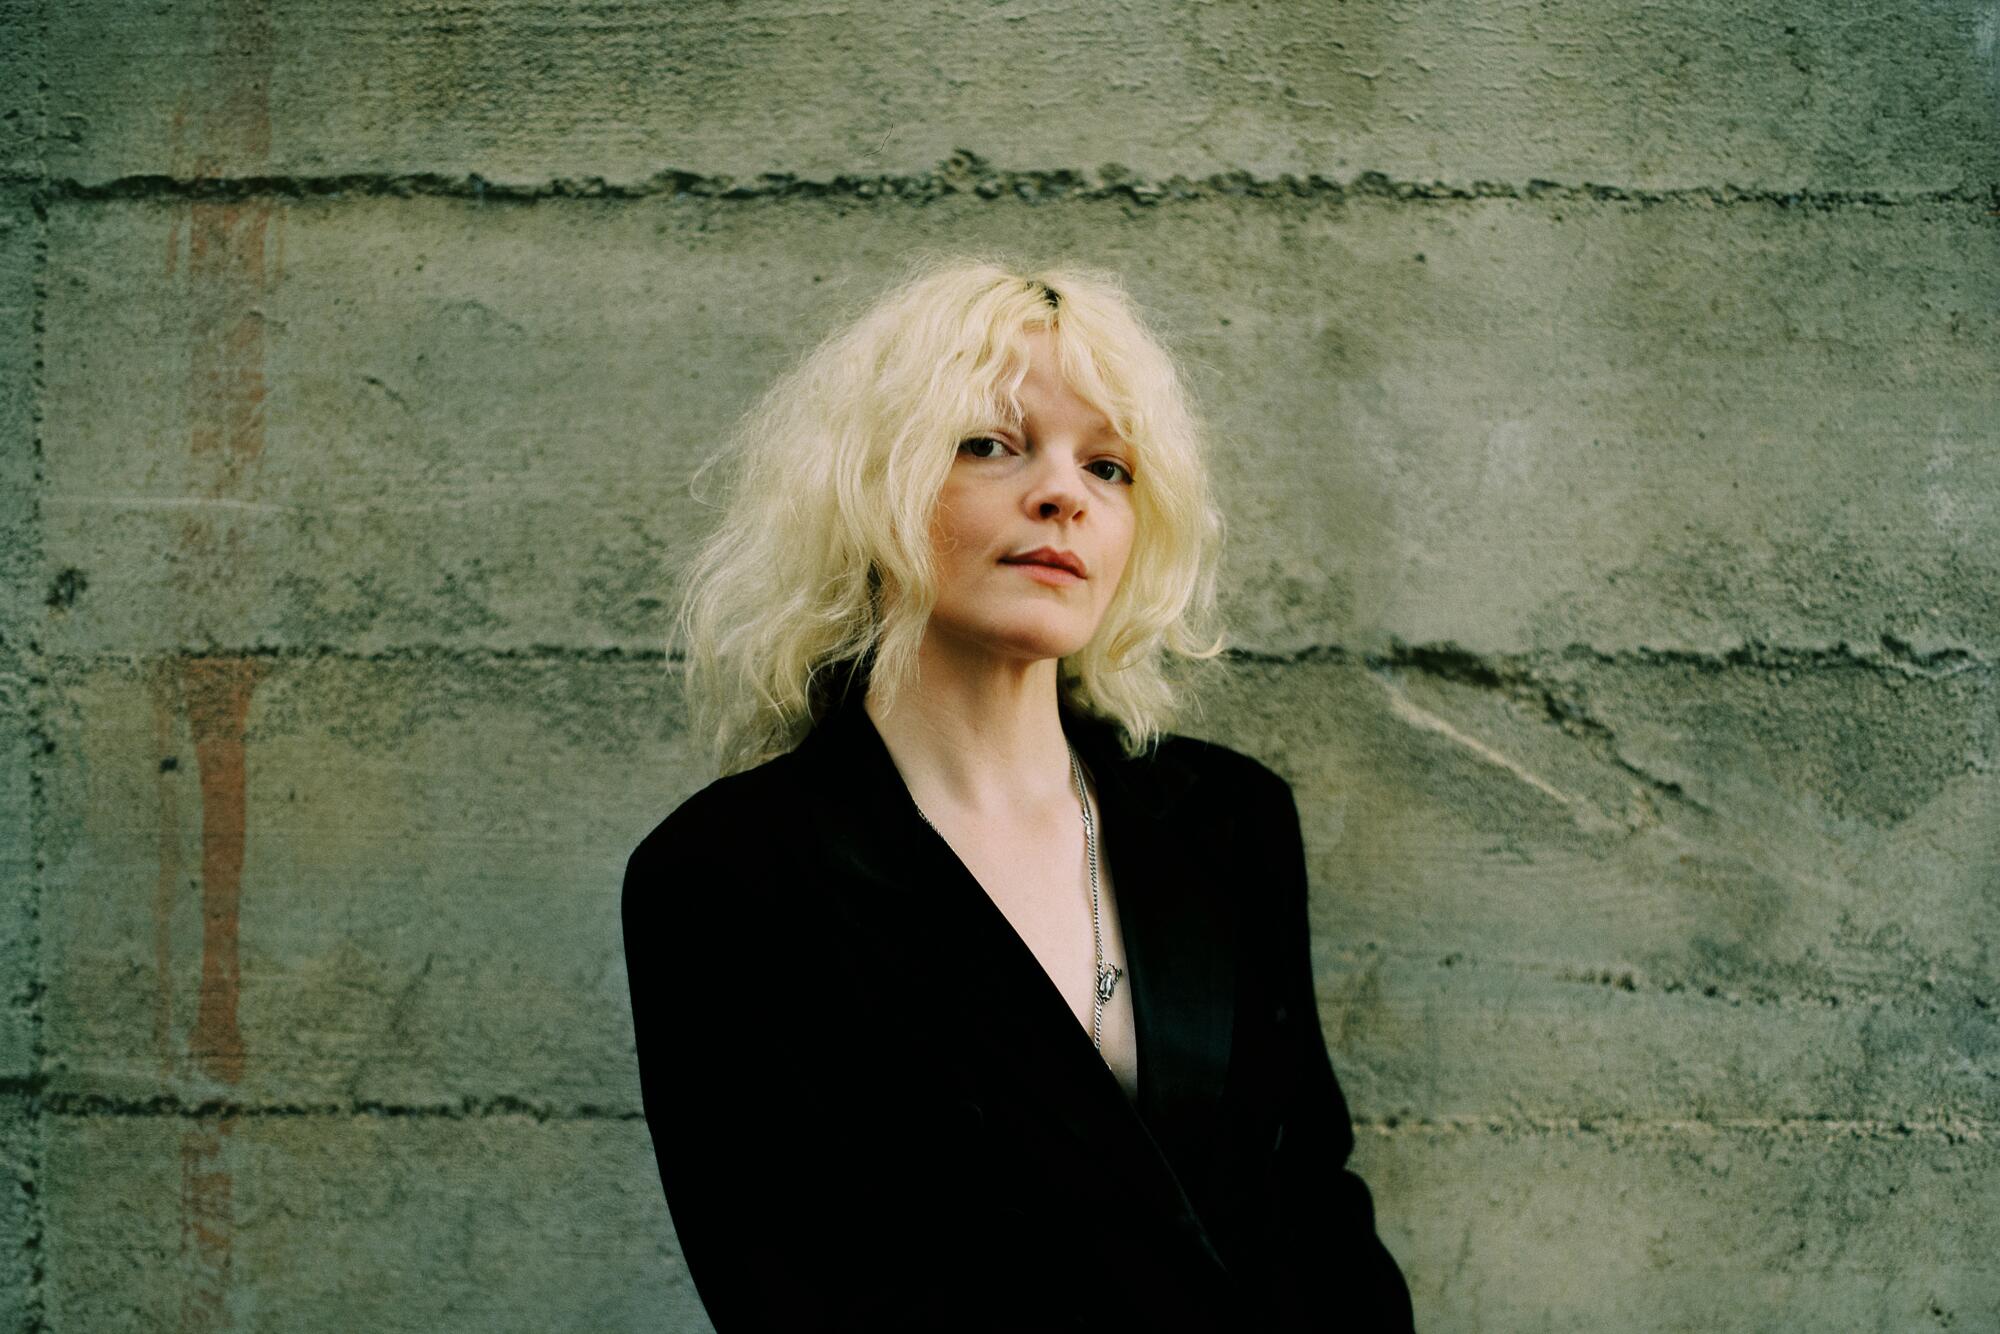 Blonde woman in black jacket standing in front of a gray wall